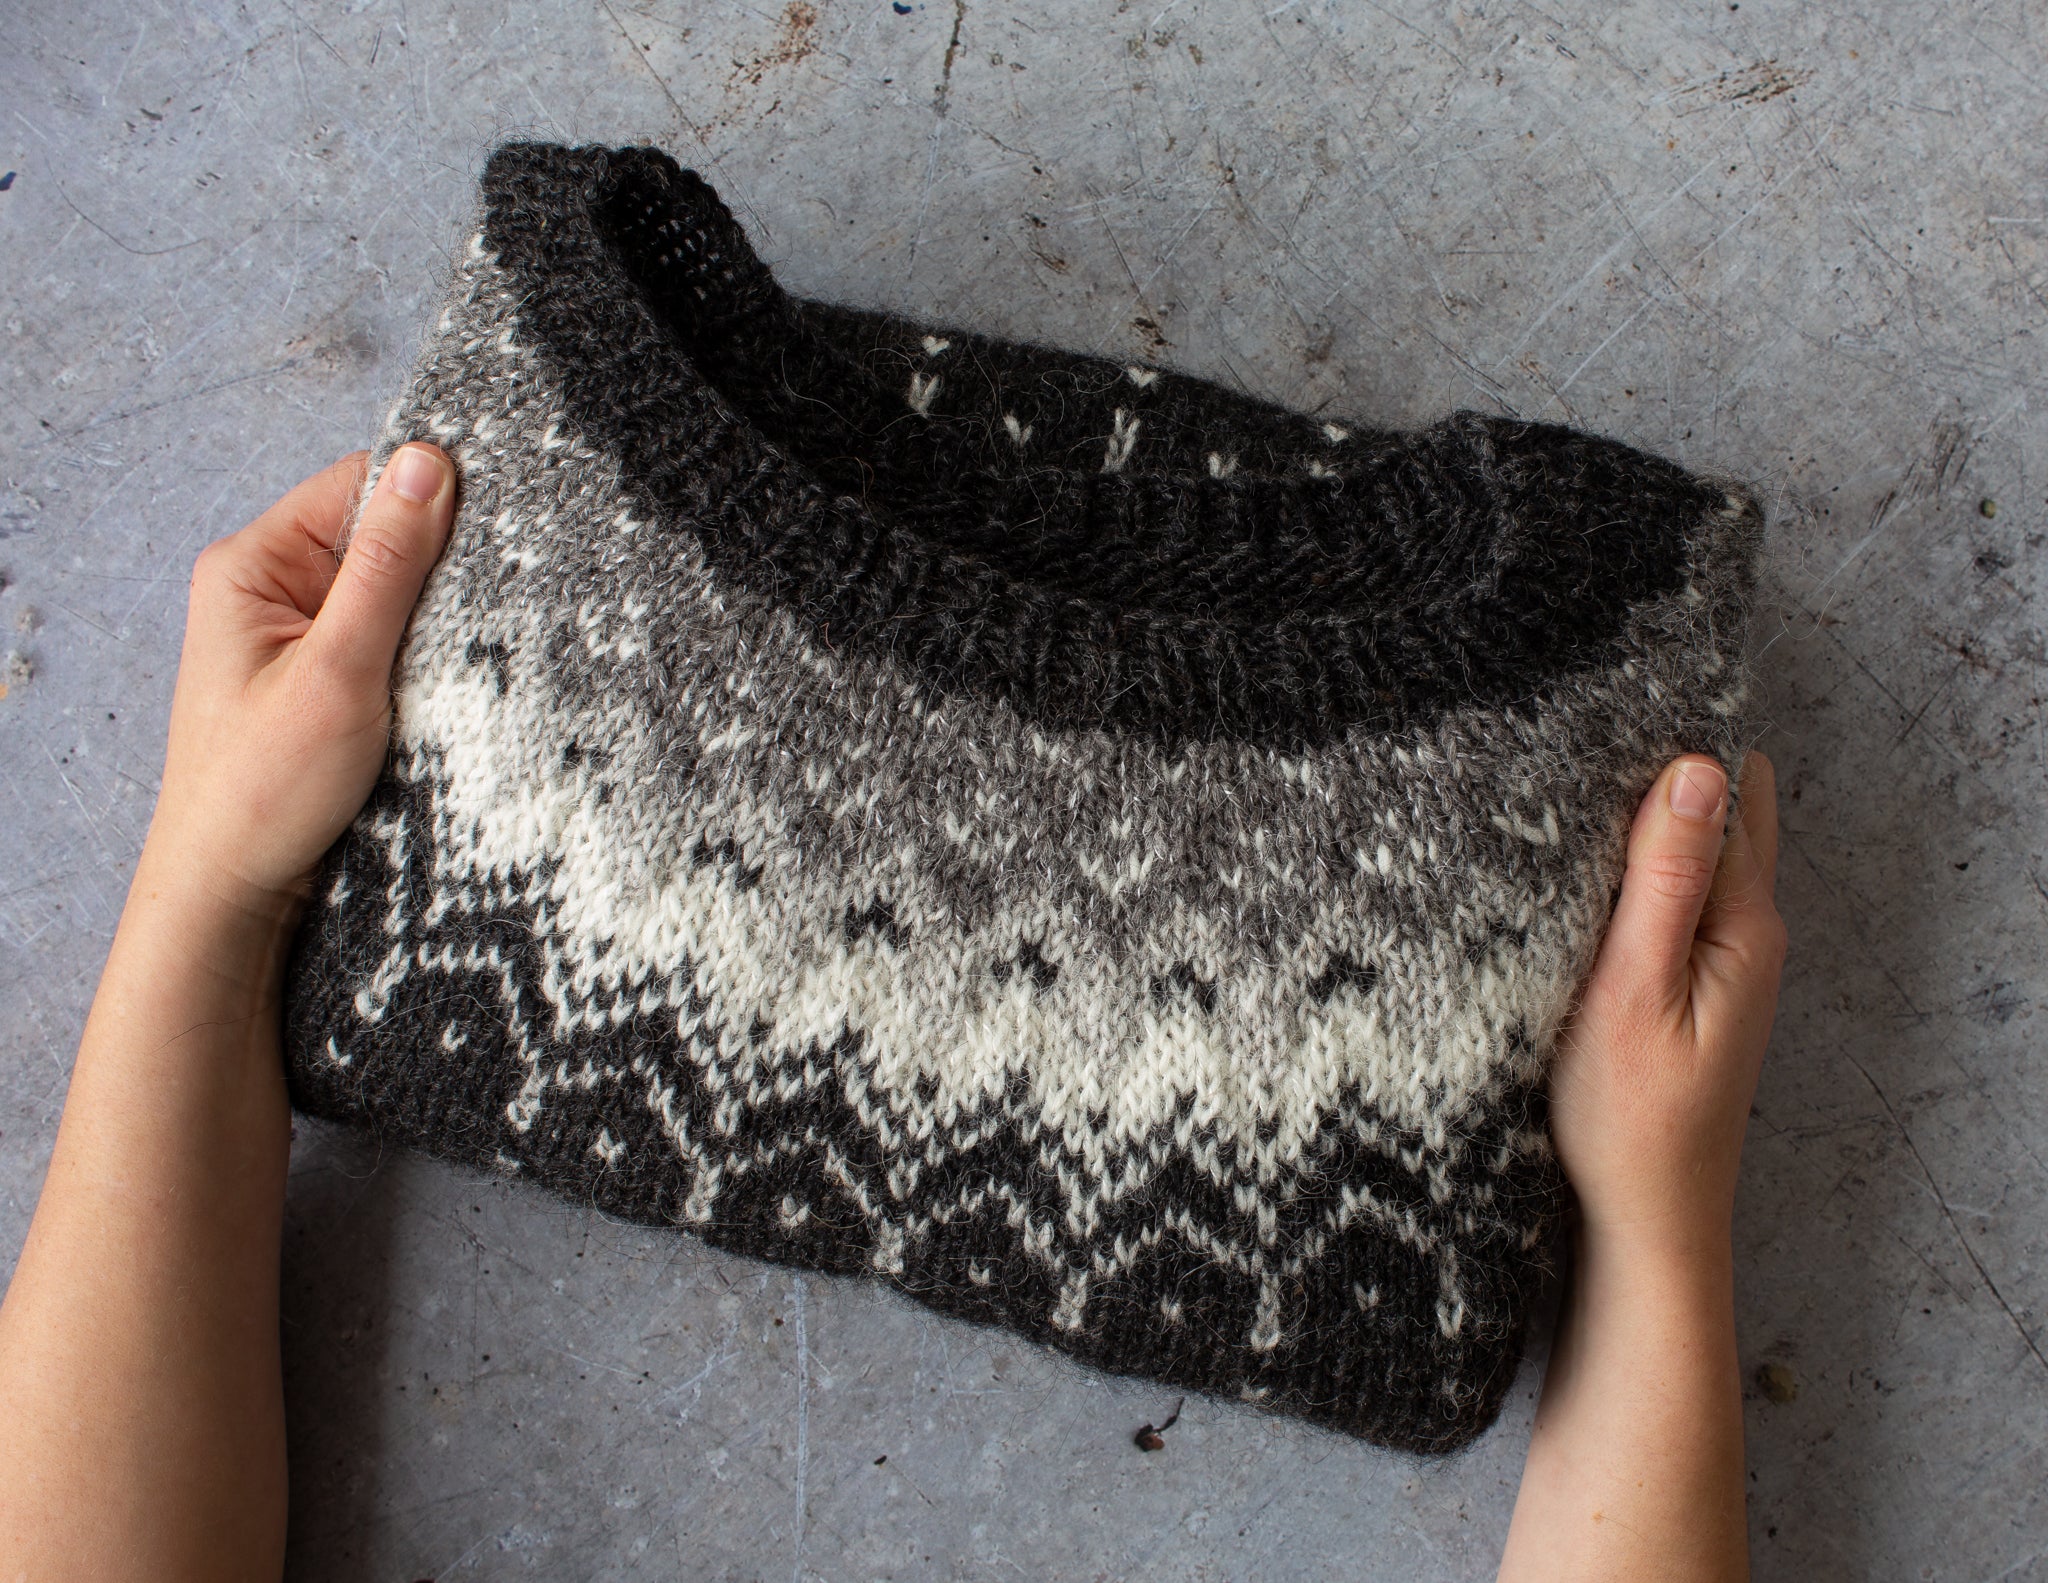 Bleideag: an easy yoke sweater that beginners can tackle - Ysolda